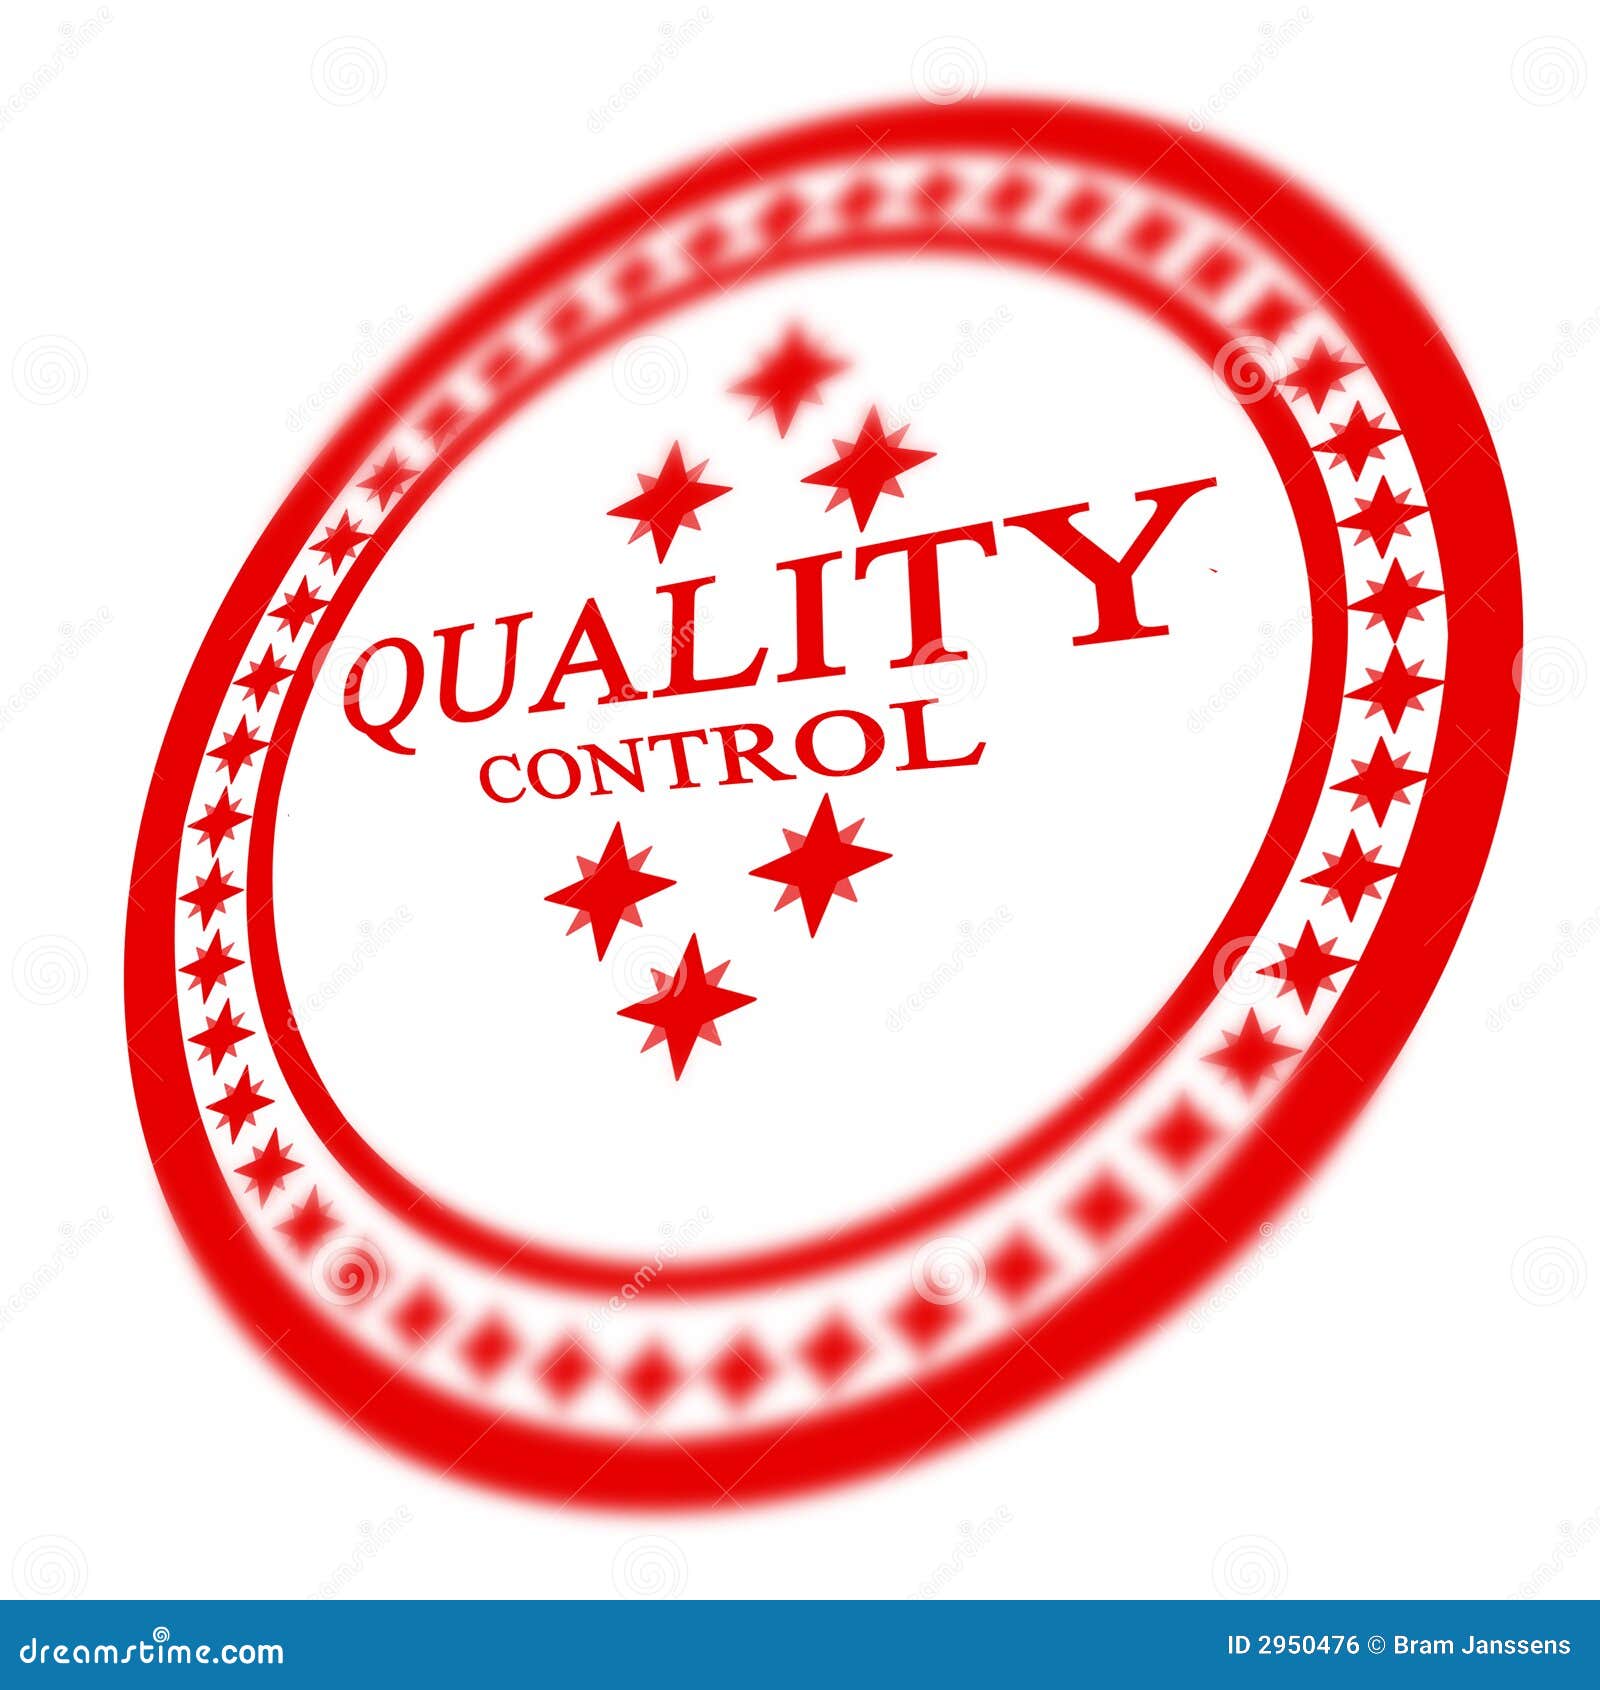 quality check clipart - photo #9